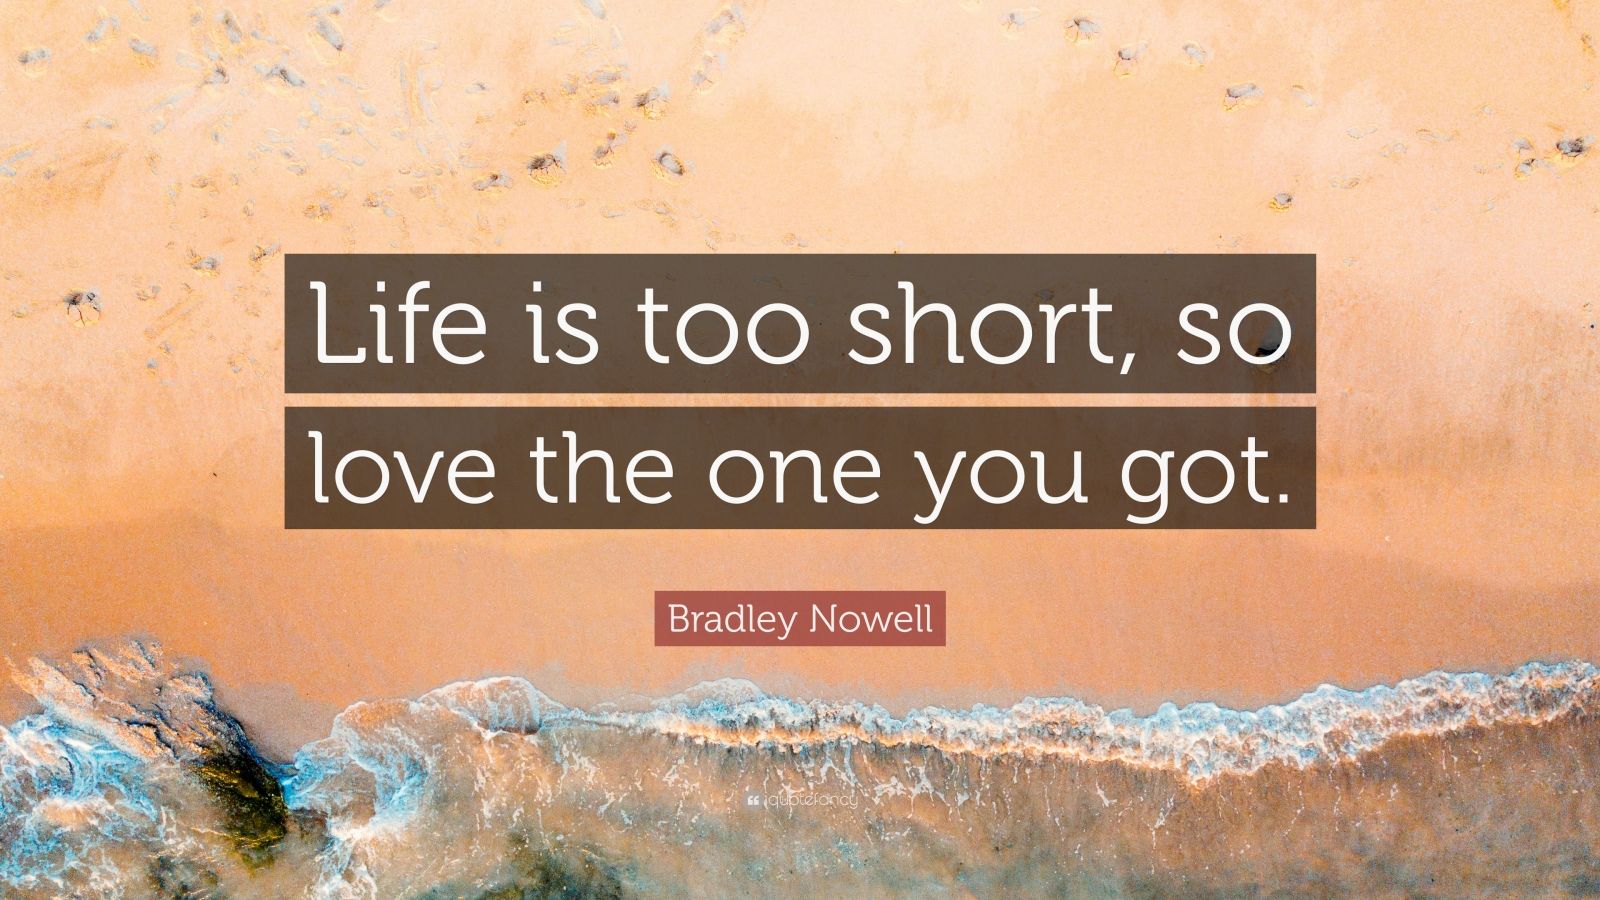 Bradley Nowell Quote: “Life is too short, so love the one you got.” (9